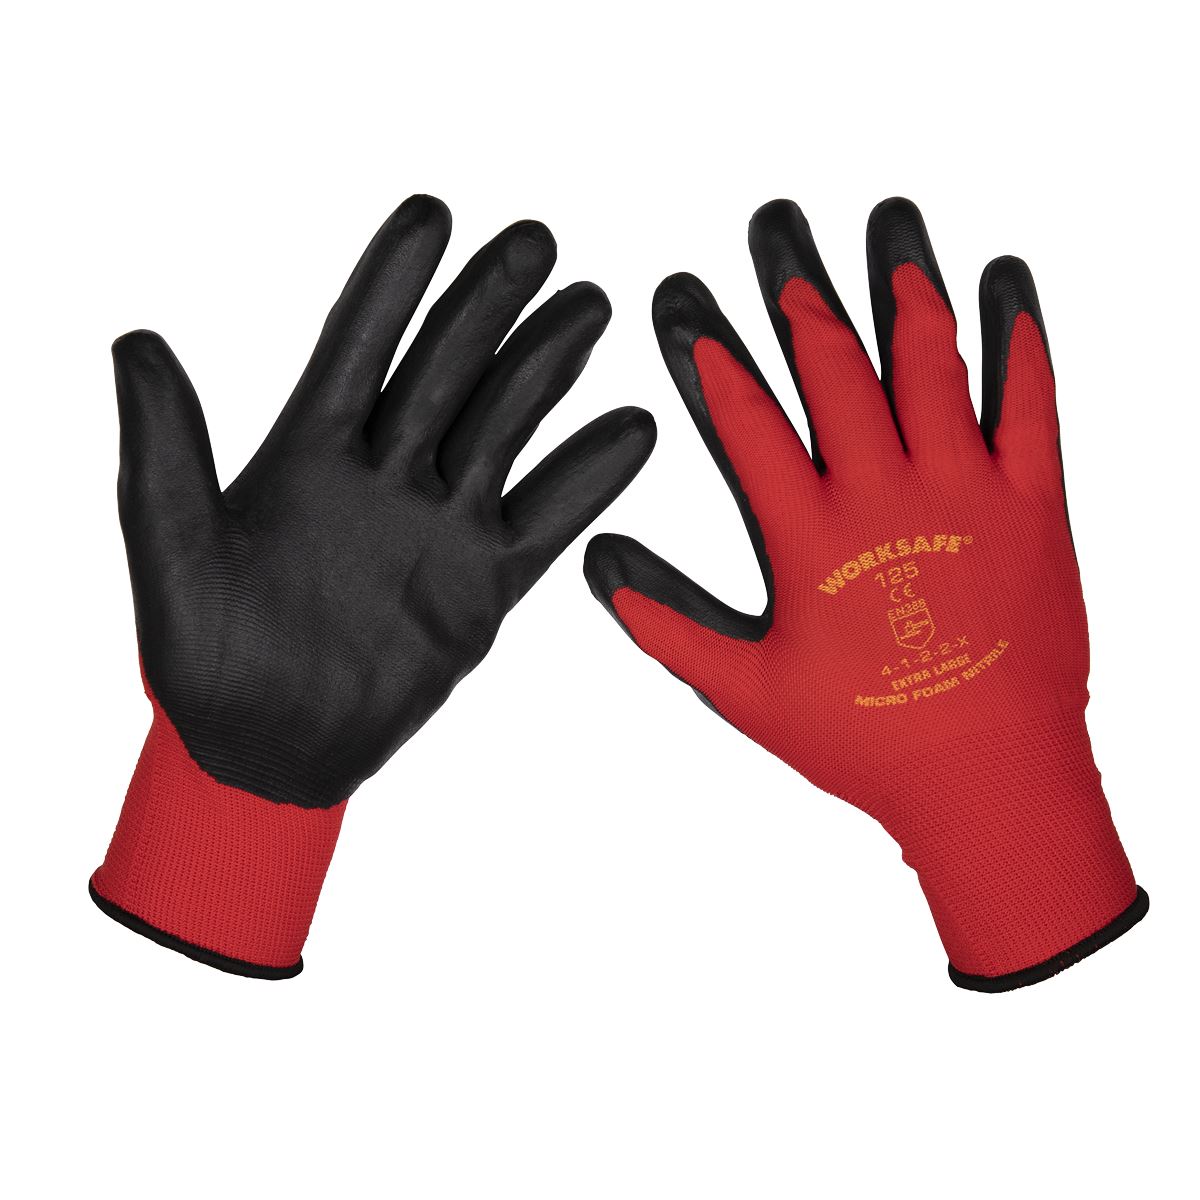 Worksafe by Sealey Flexi Grip Nitrile Palm Gloves (X-Large) - Pair